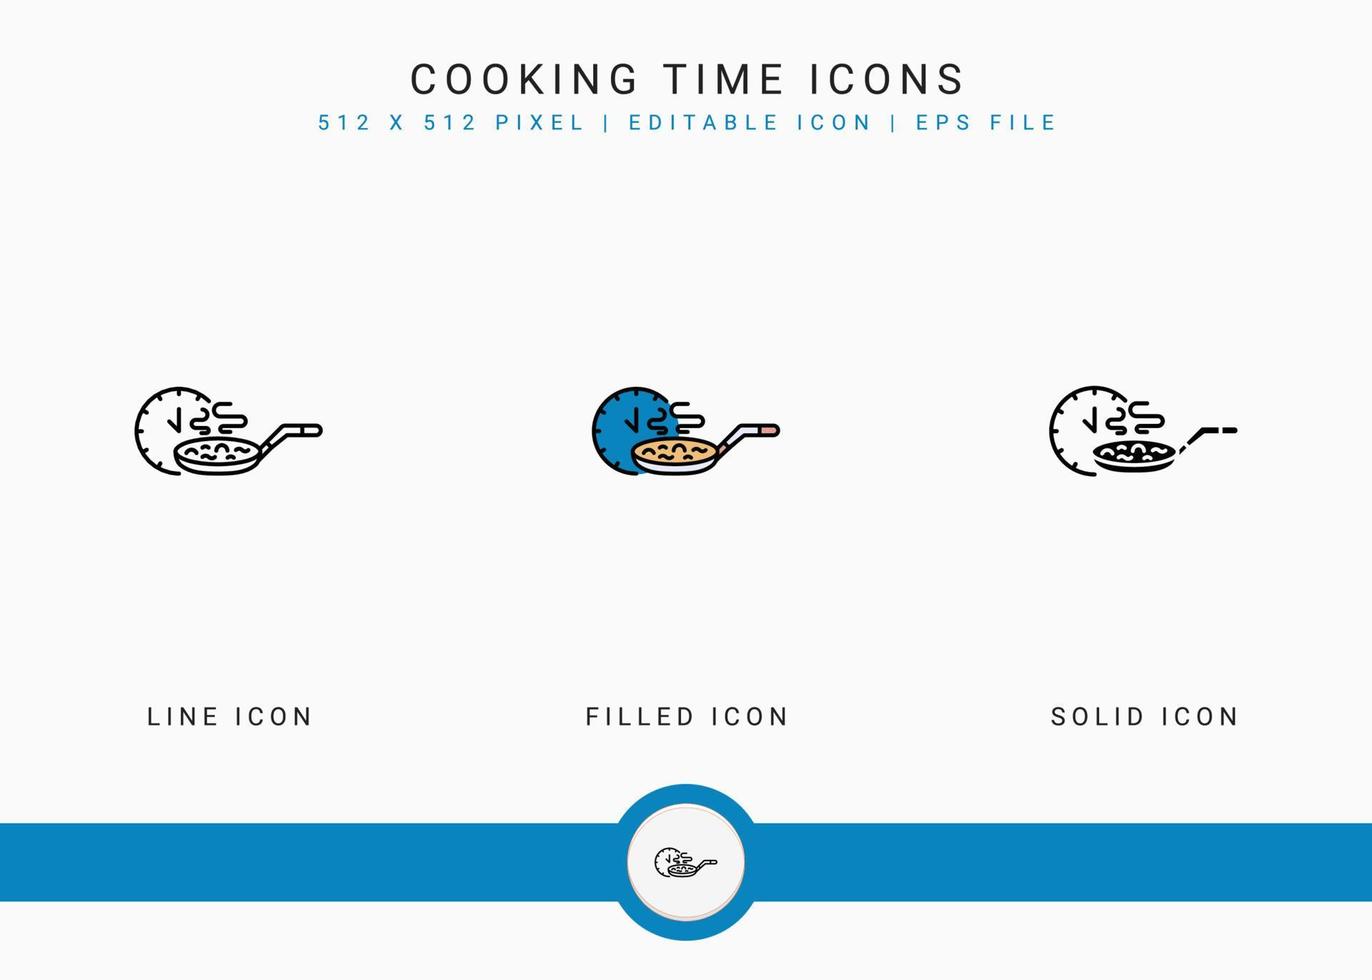 Cooking time icons set vector illustration with solid icon line style. Kitchen utensils concept. Editable stroke icon on isolated background for web design, user interface, and mobile application